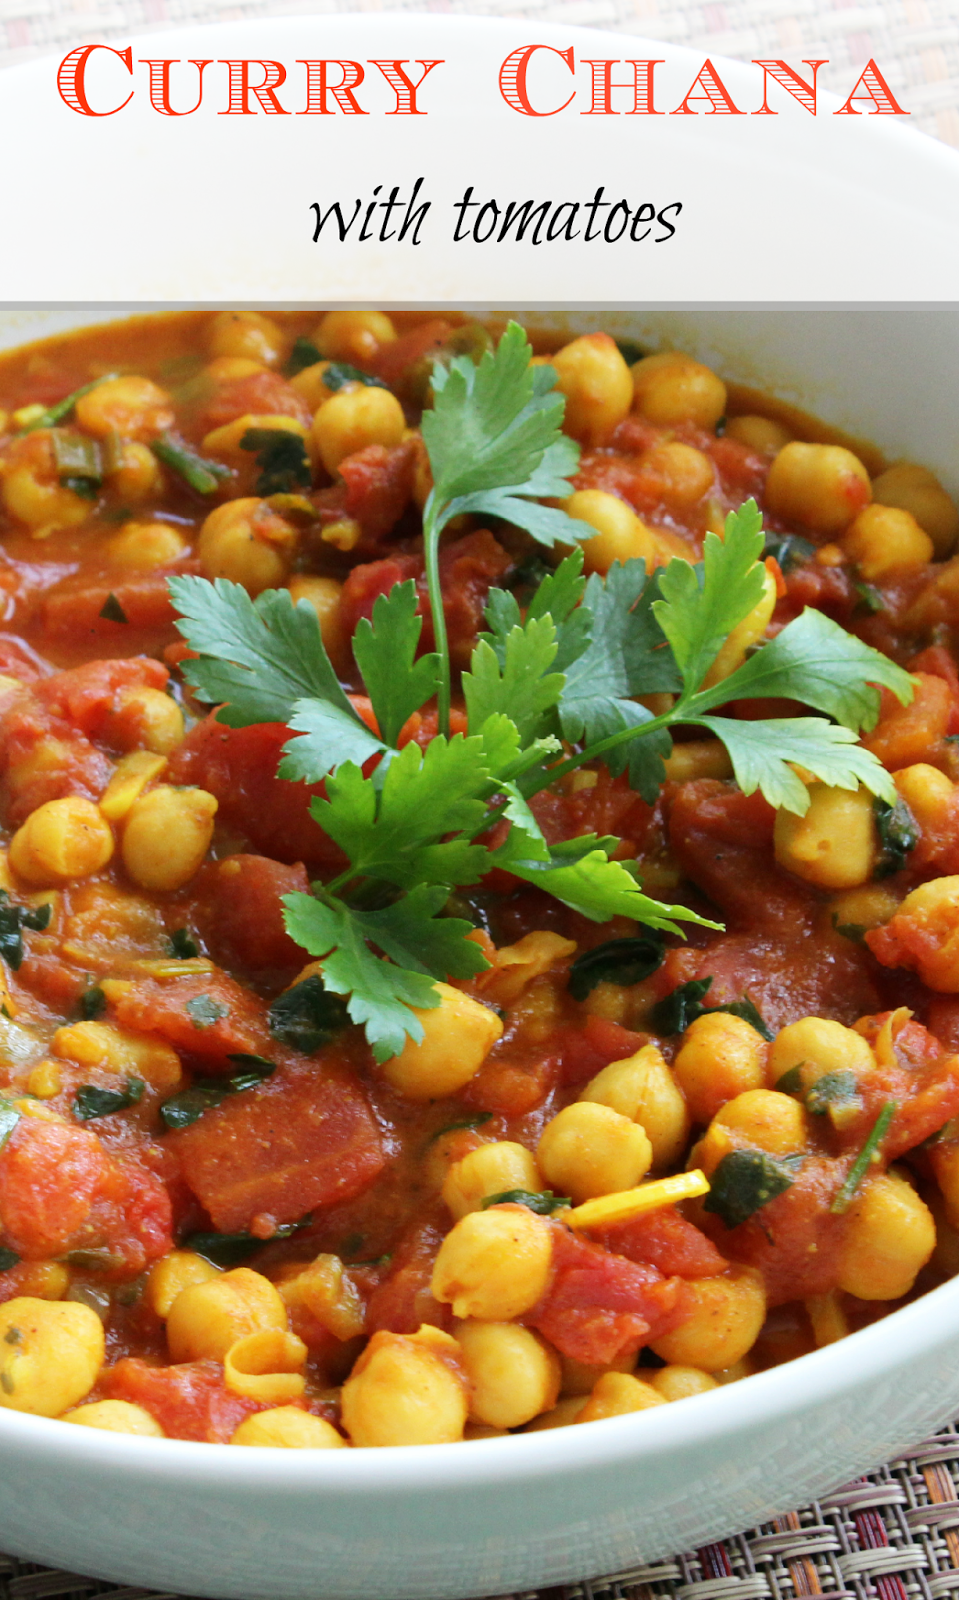 Curry Chana and tomatoes